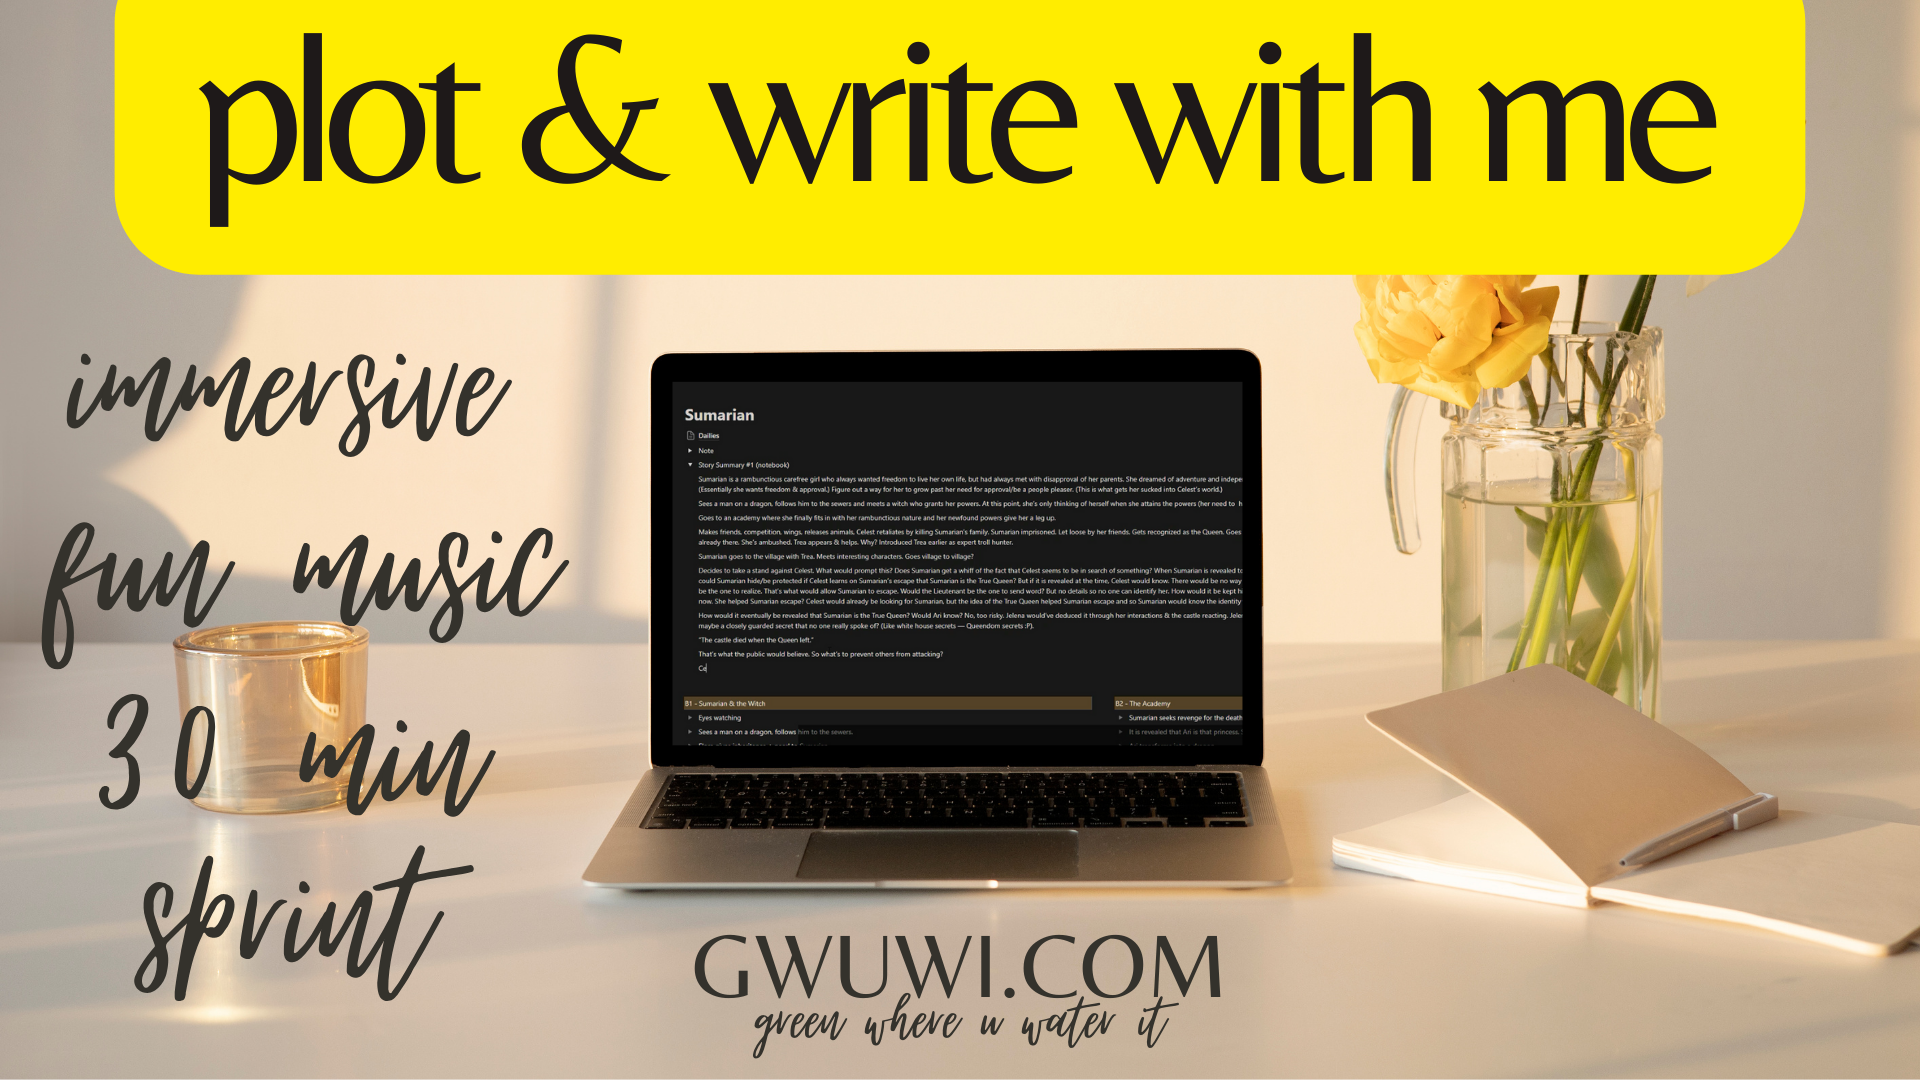 Plot & Write a Story With Me on Notion || 30 Min Sprint || Upbeat Music || Epic Fantasy